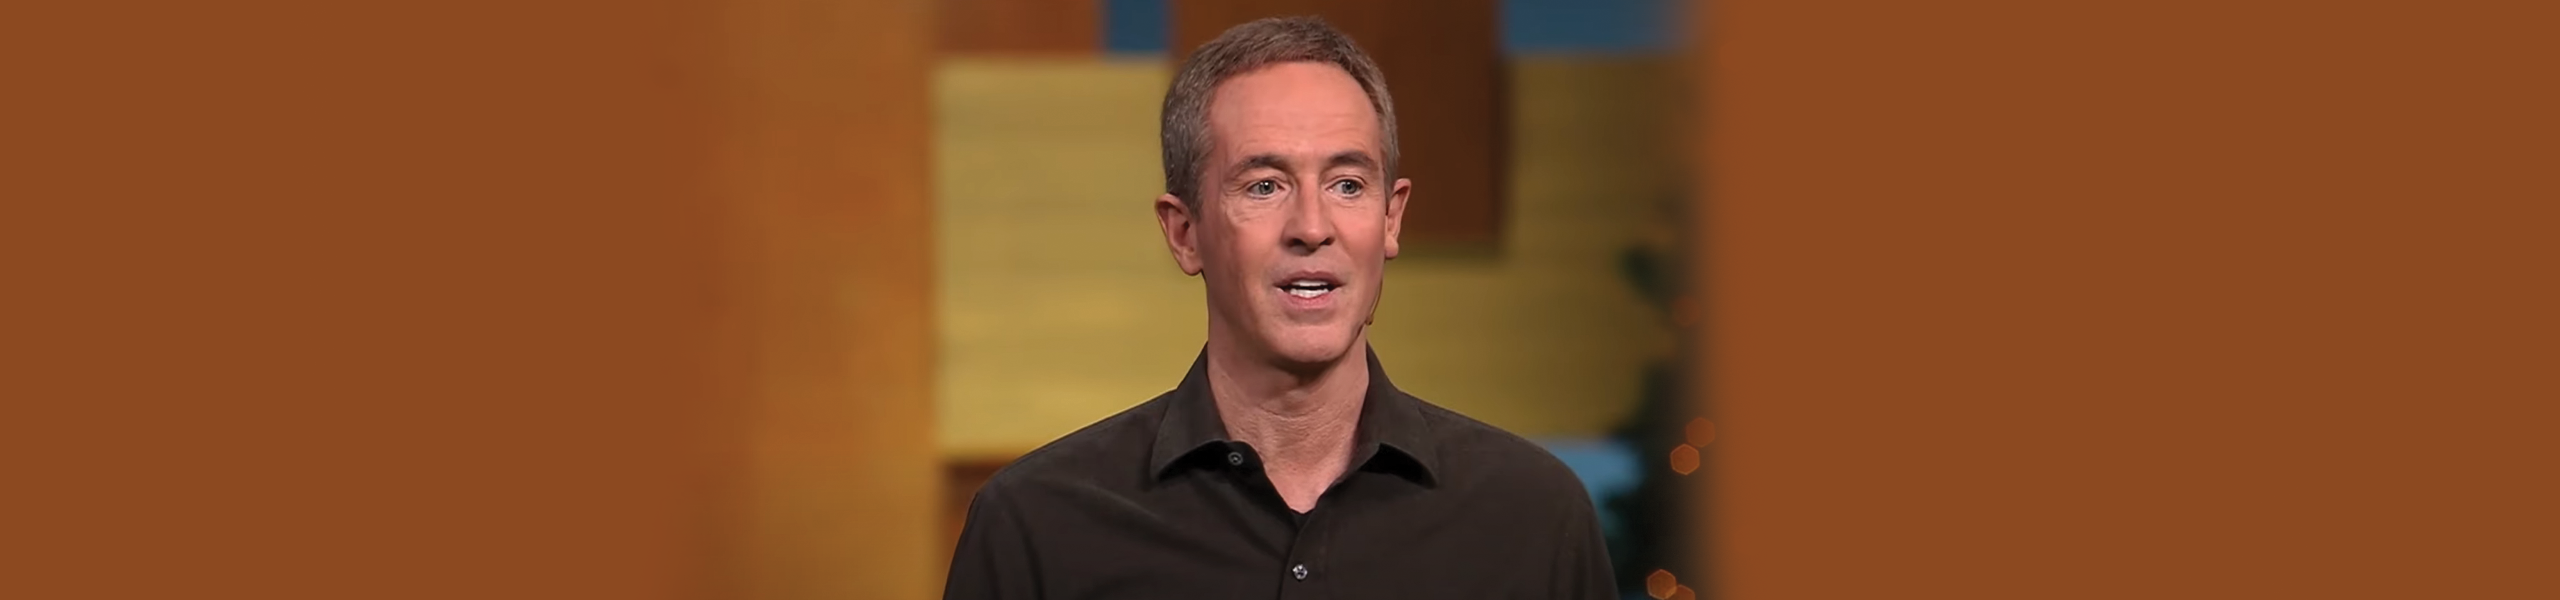 Small Group Bible Studies from Andy Stanley | Zondervan